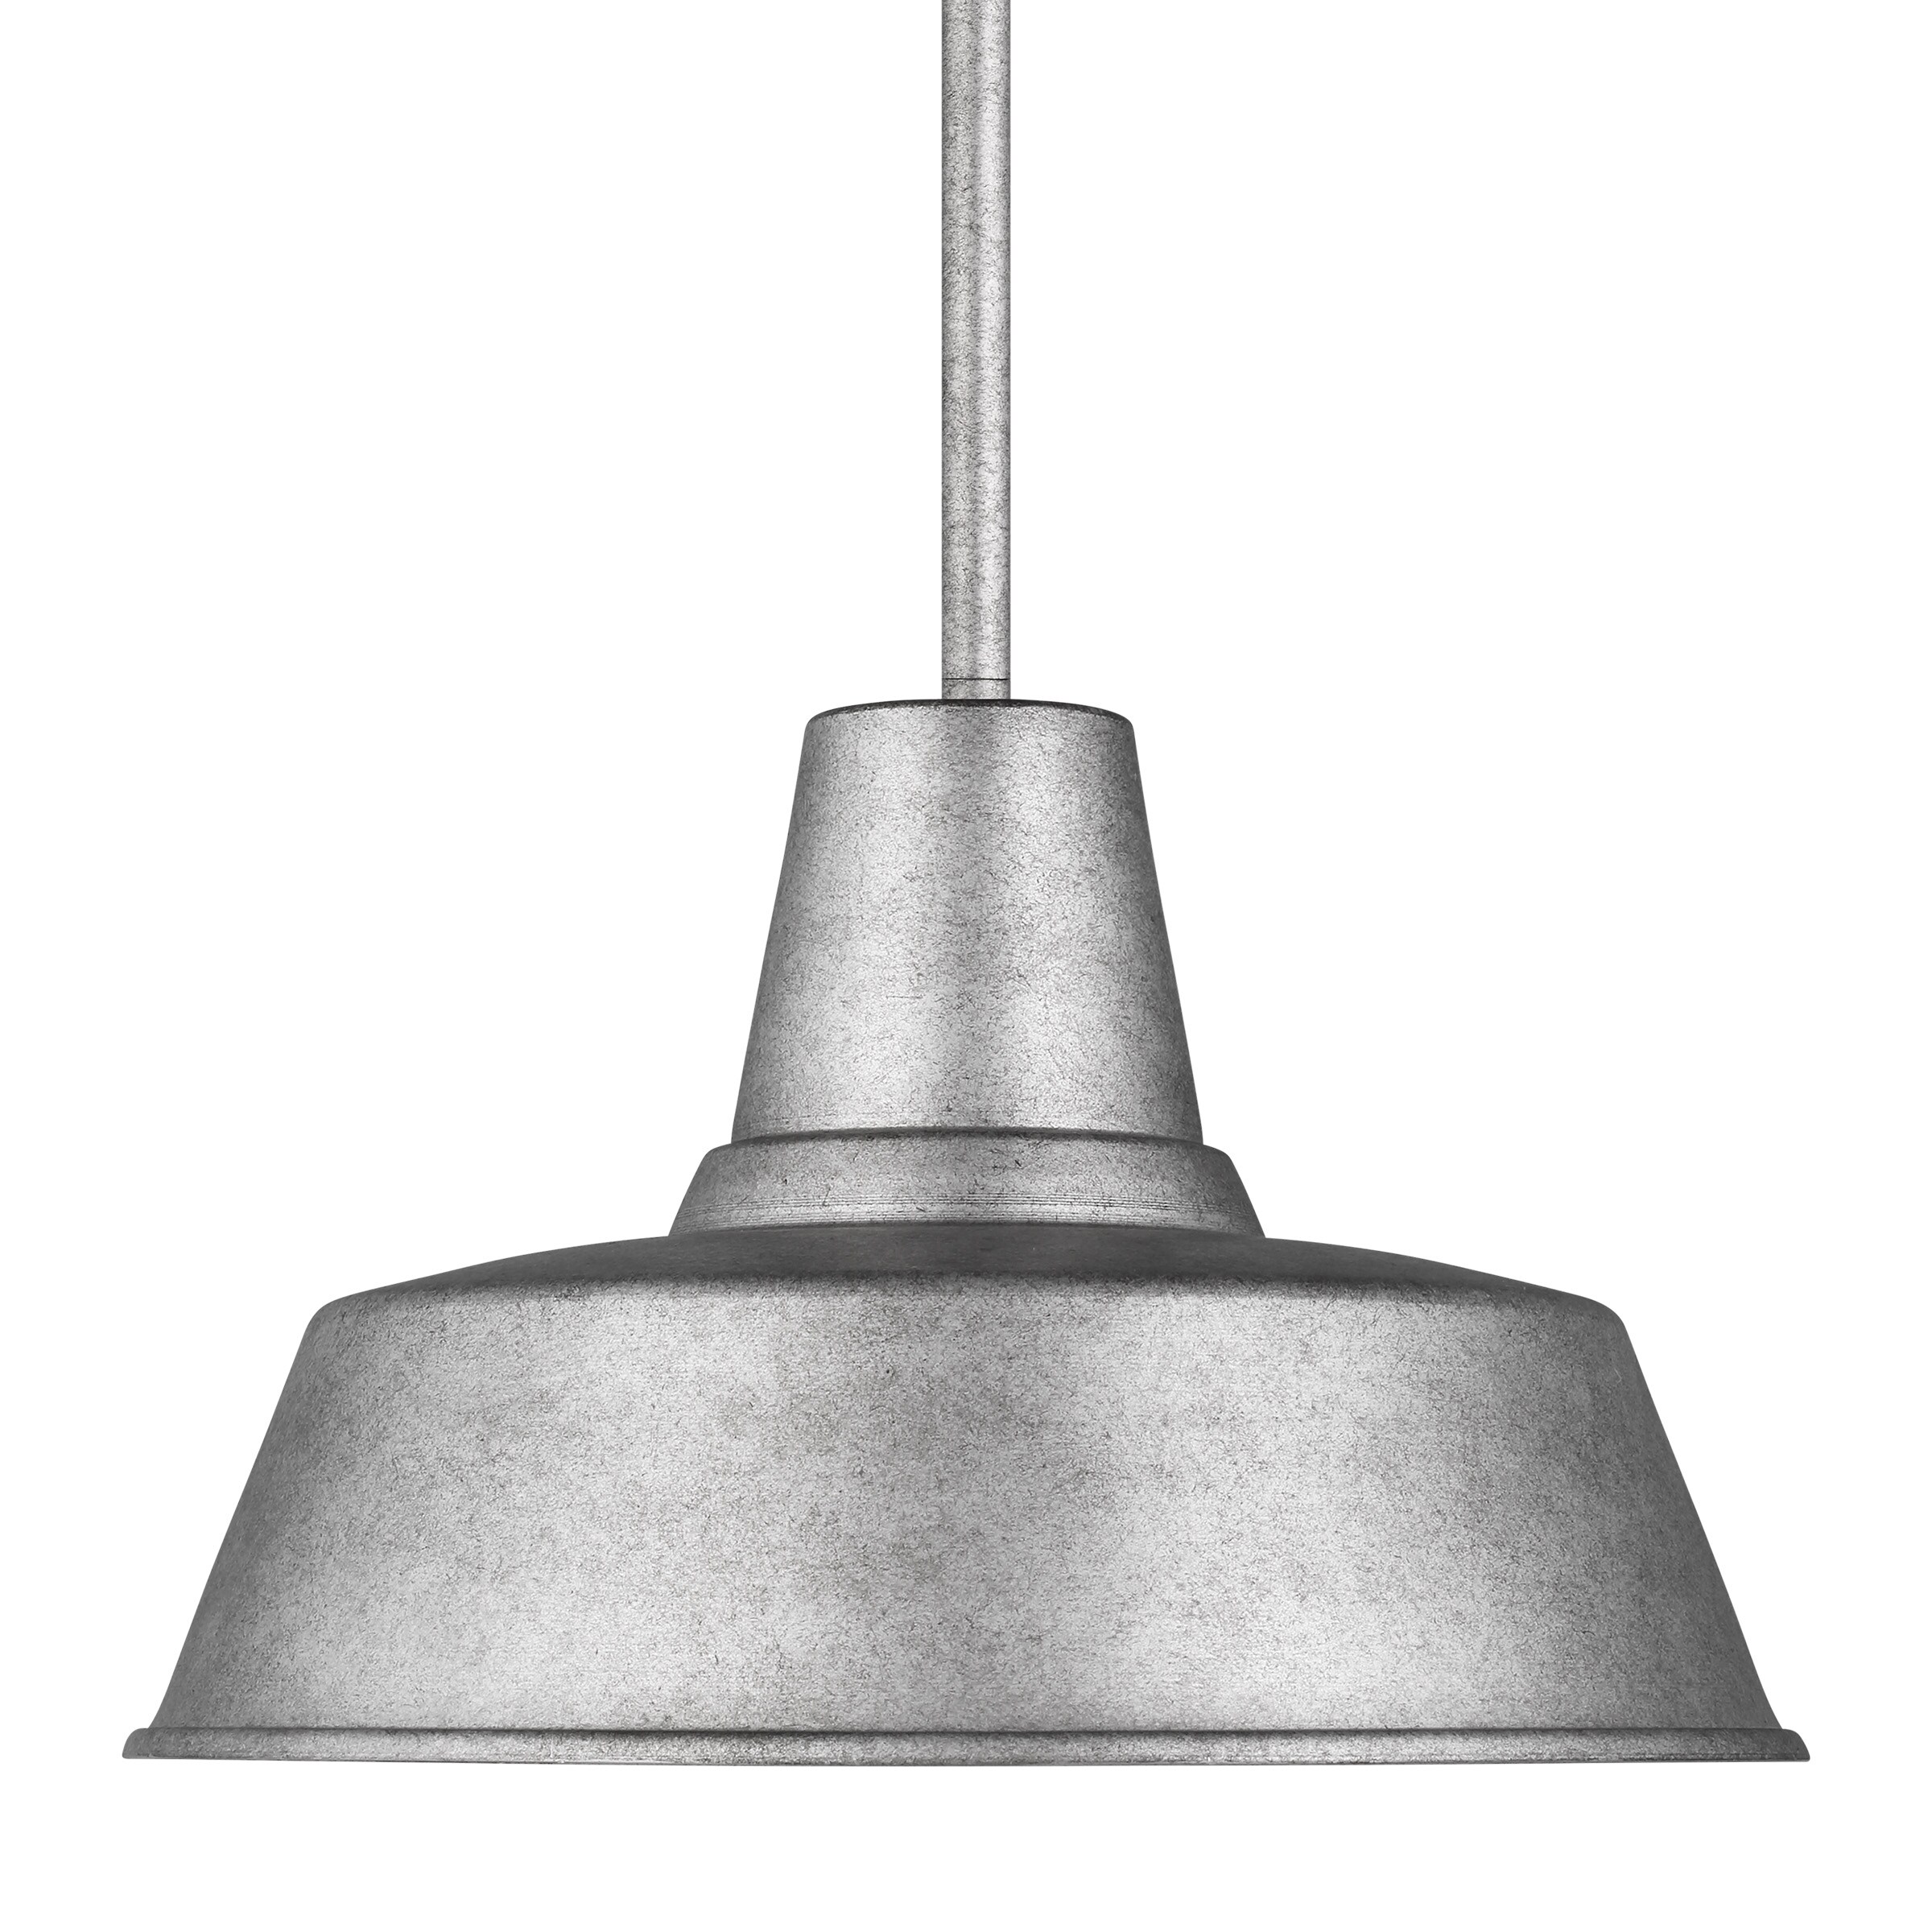 Sea Gull Lighting Barn Light Weathered Pewter Traditional Dome Outdoor Pendant Light